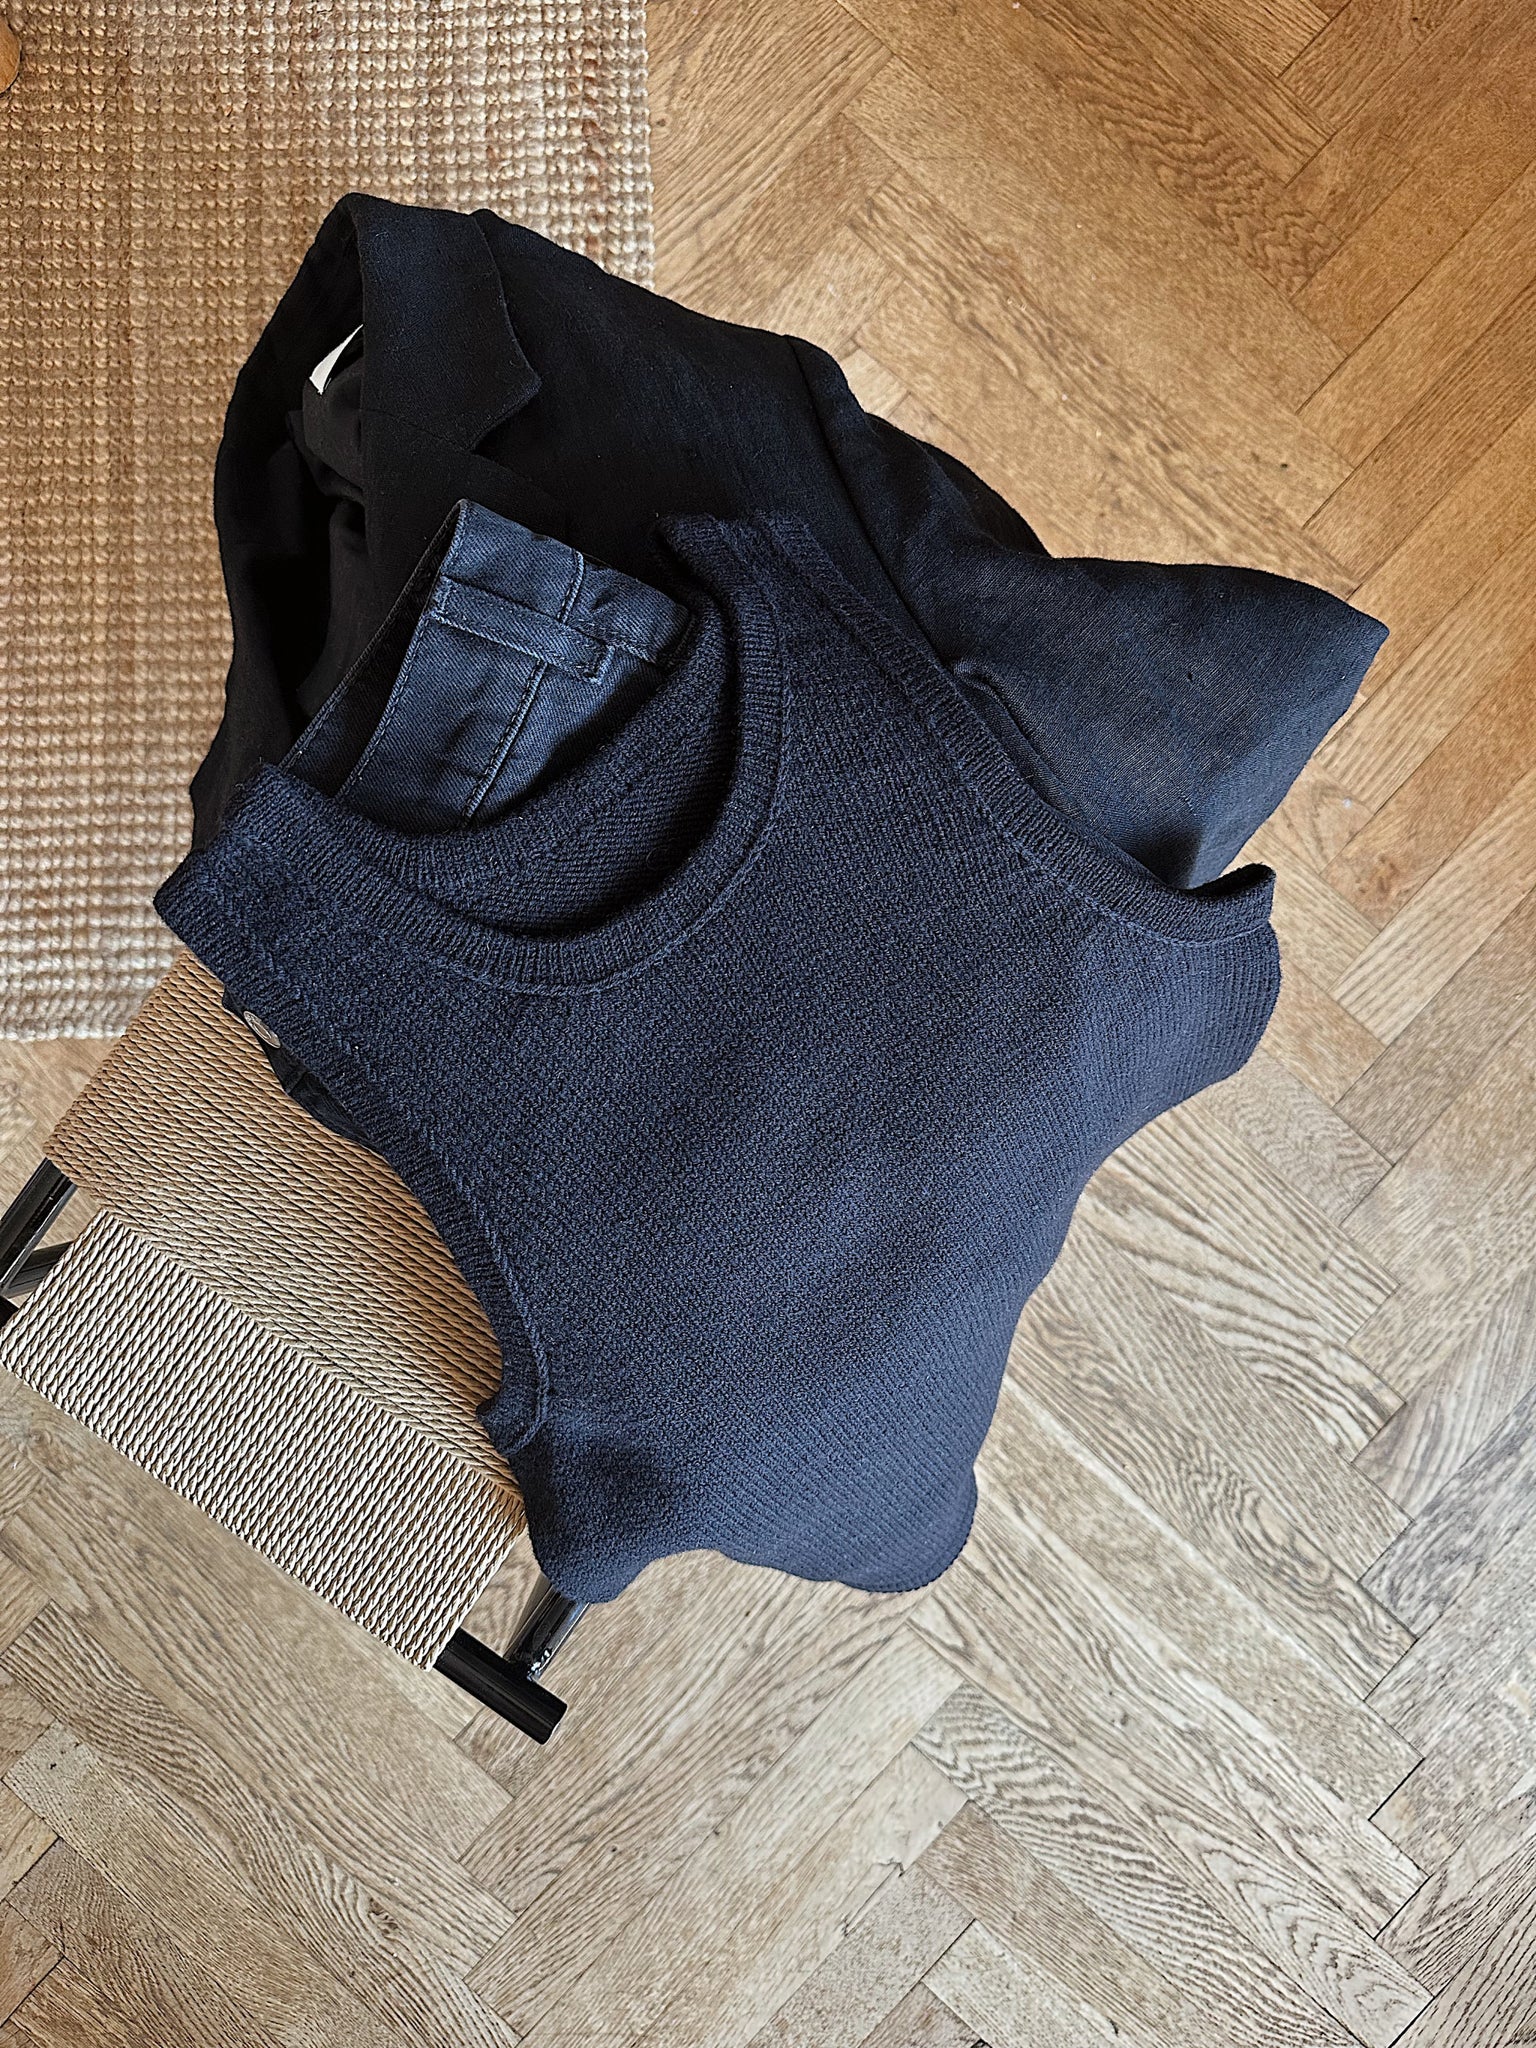 Camisole No. 9 - Knitting Pattern in English – • MY FAVOURITE